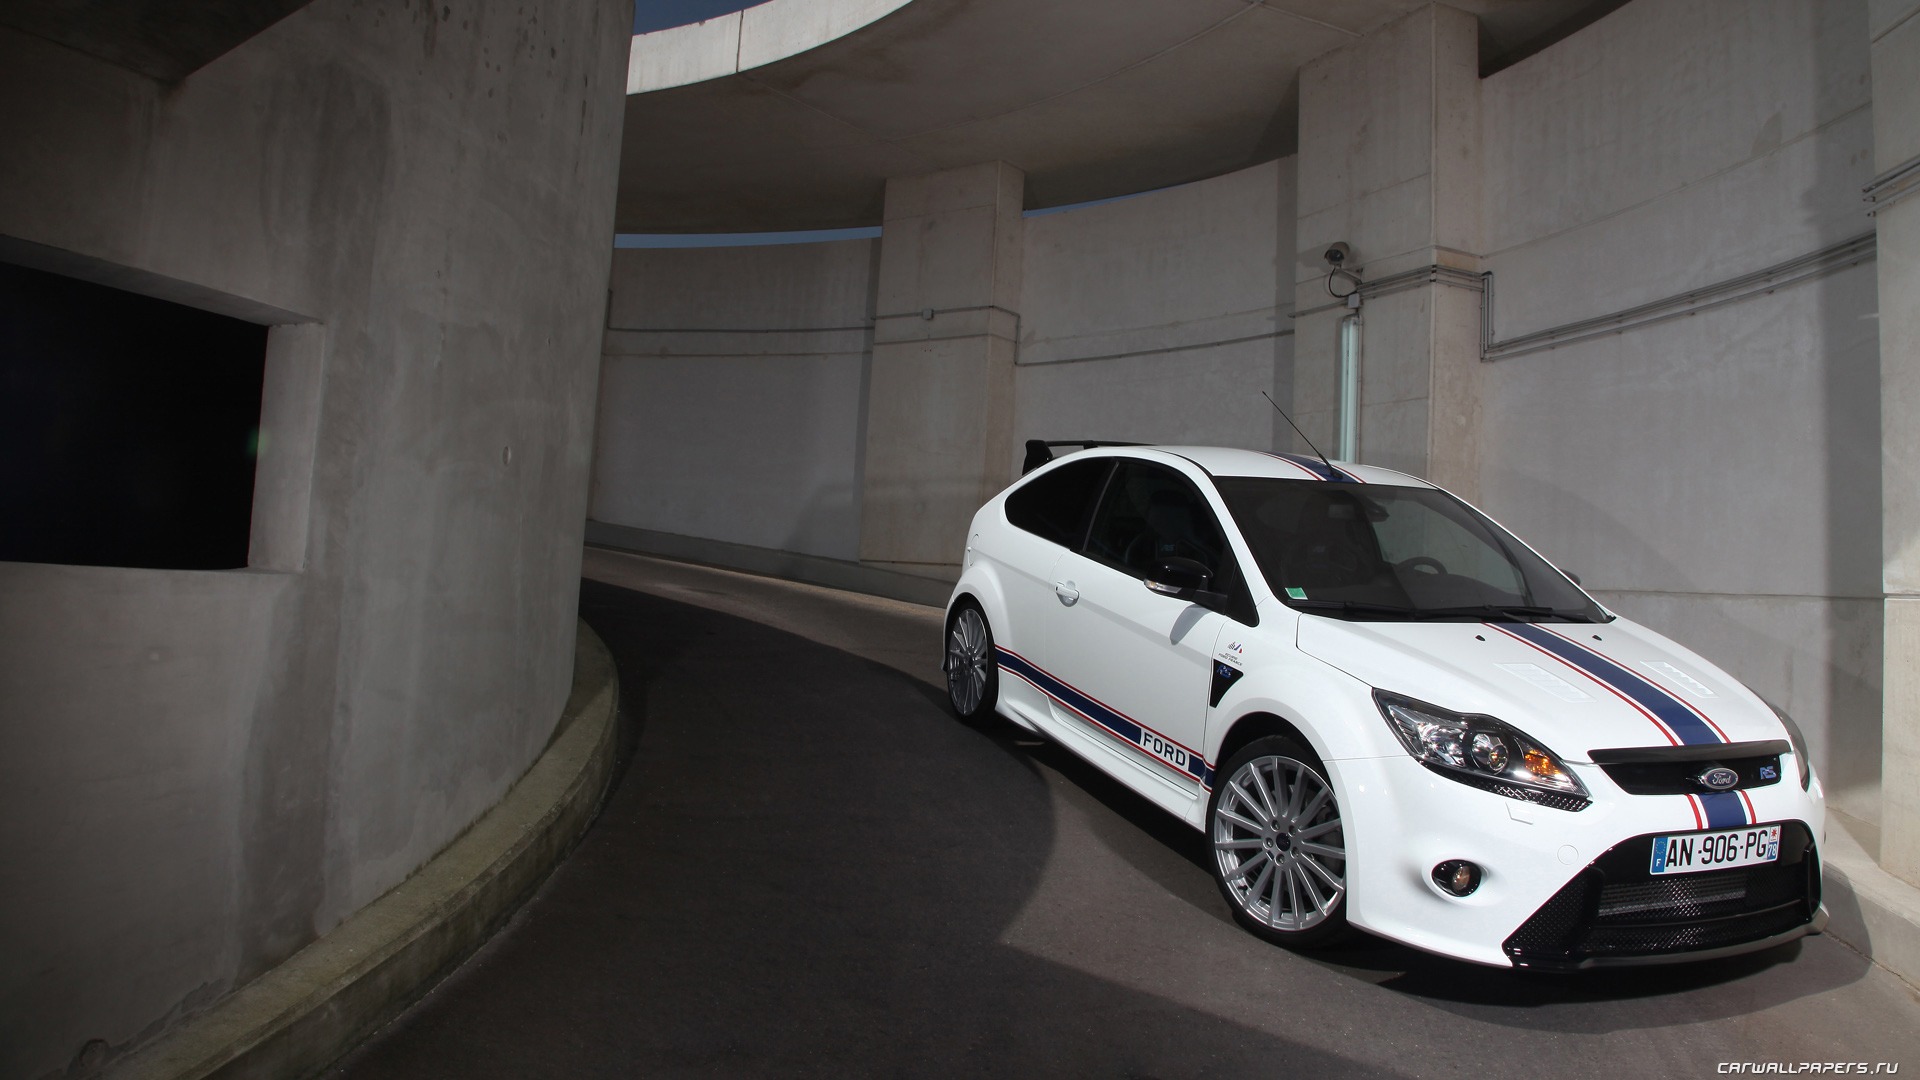 Ford Focus RS Le Mans Classic - 2010 福特7 - 1920x1080